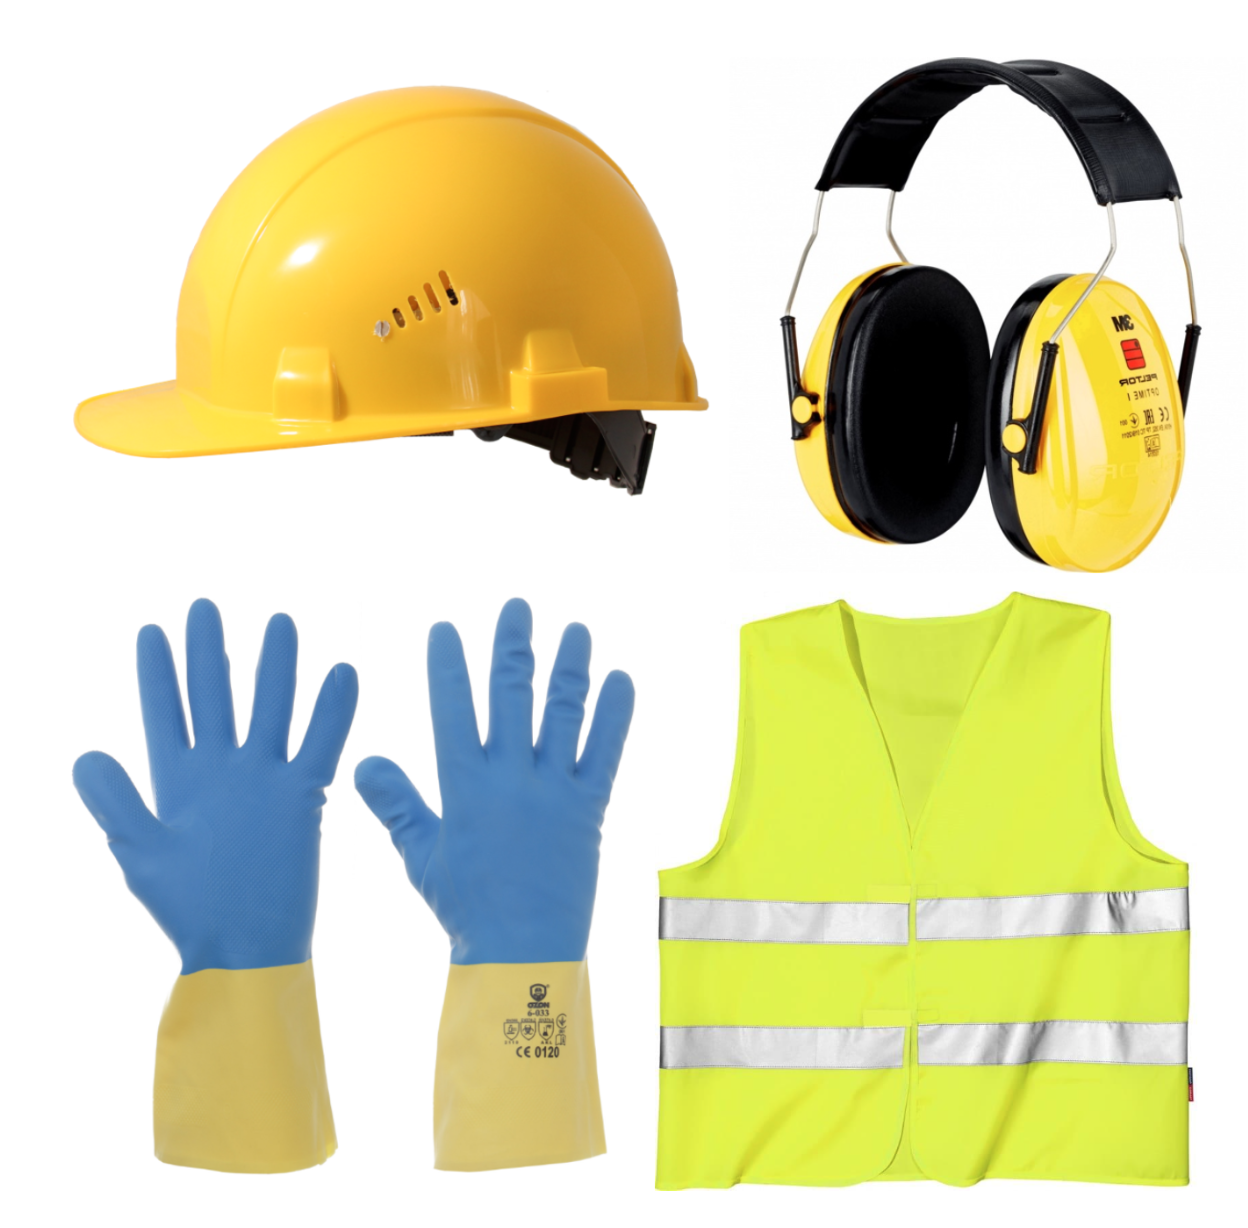 work uniform and tools